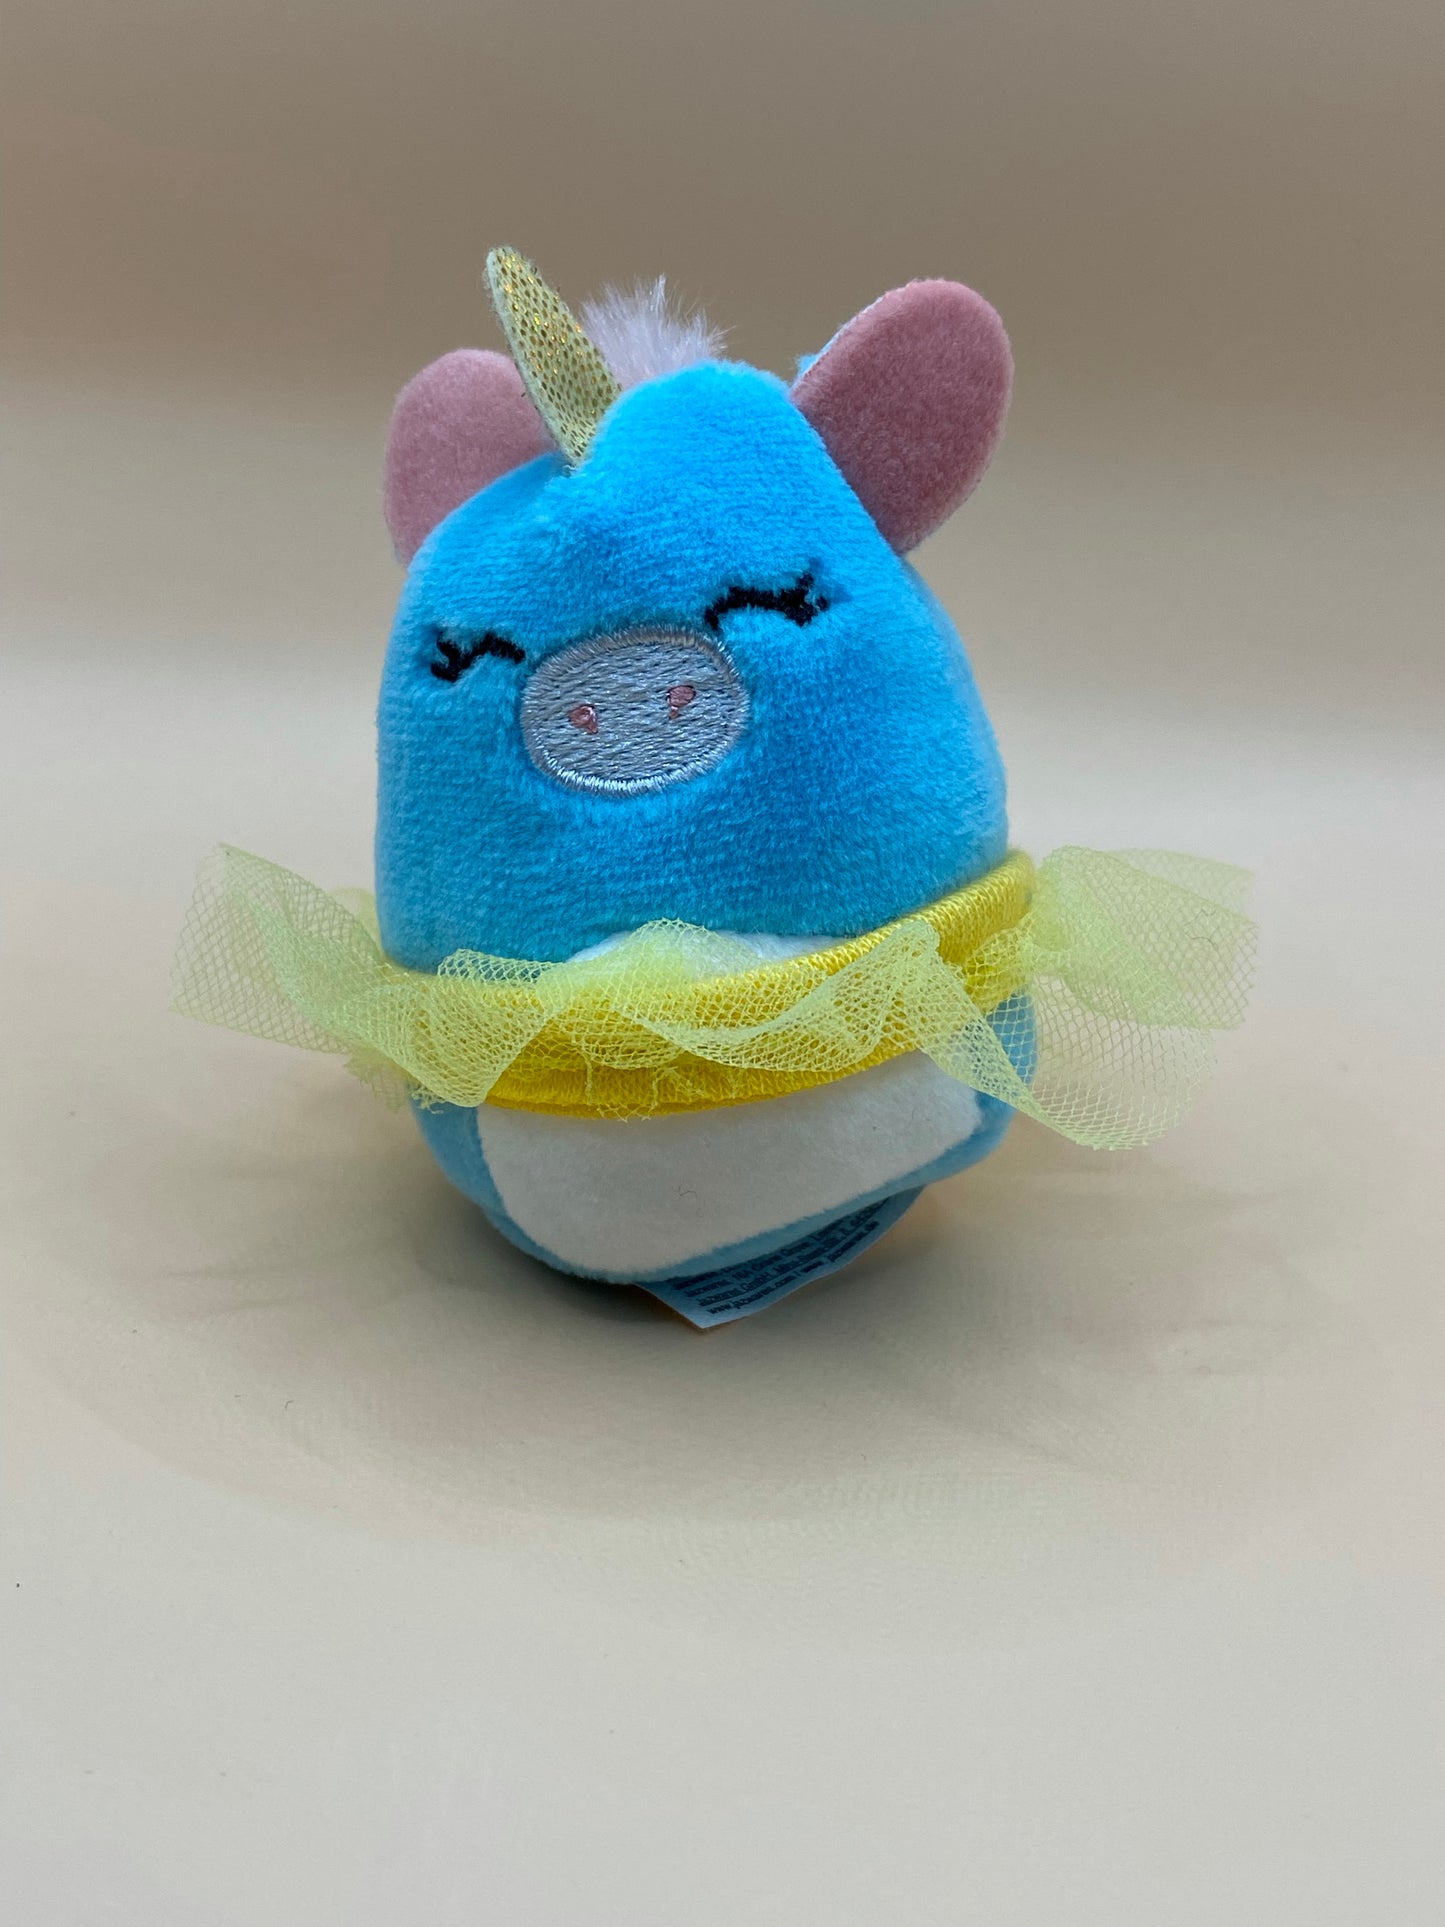 Blue Unicorn with Yellow Tutu ~ 2" Individual Squishville by Squishmallows